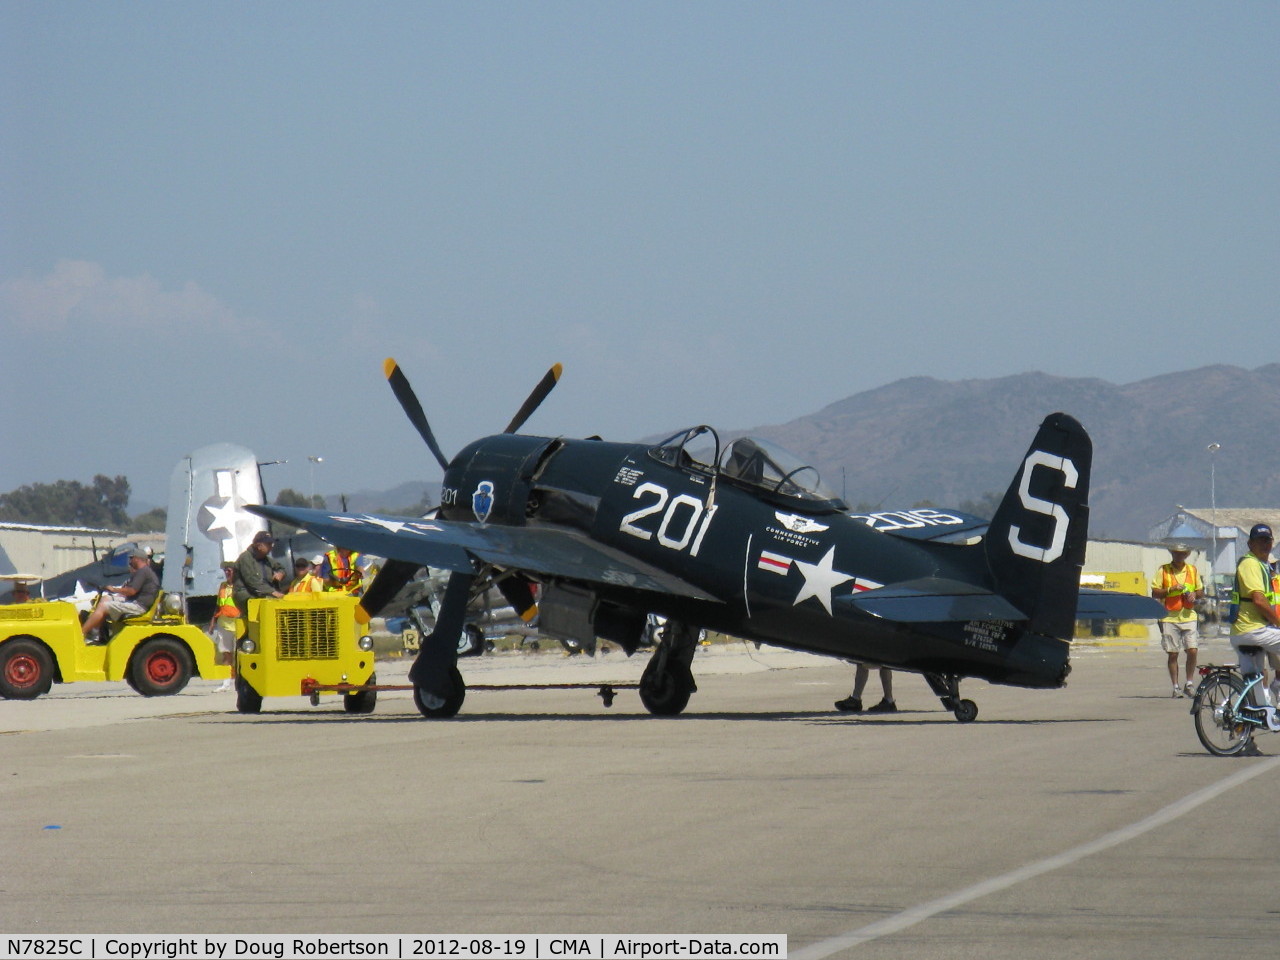 N7825C, 1948 Grumman F8F-2 (G58) Bearcat C/N D.1227, 1949 Grumman F8F-2 BEARCAT, P&W R-2800-34W 2,100 Hp, in tow on flight line. Aircraft is a 1949, not 1948 as registered.